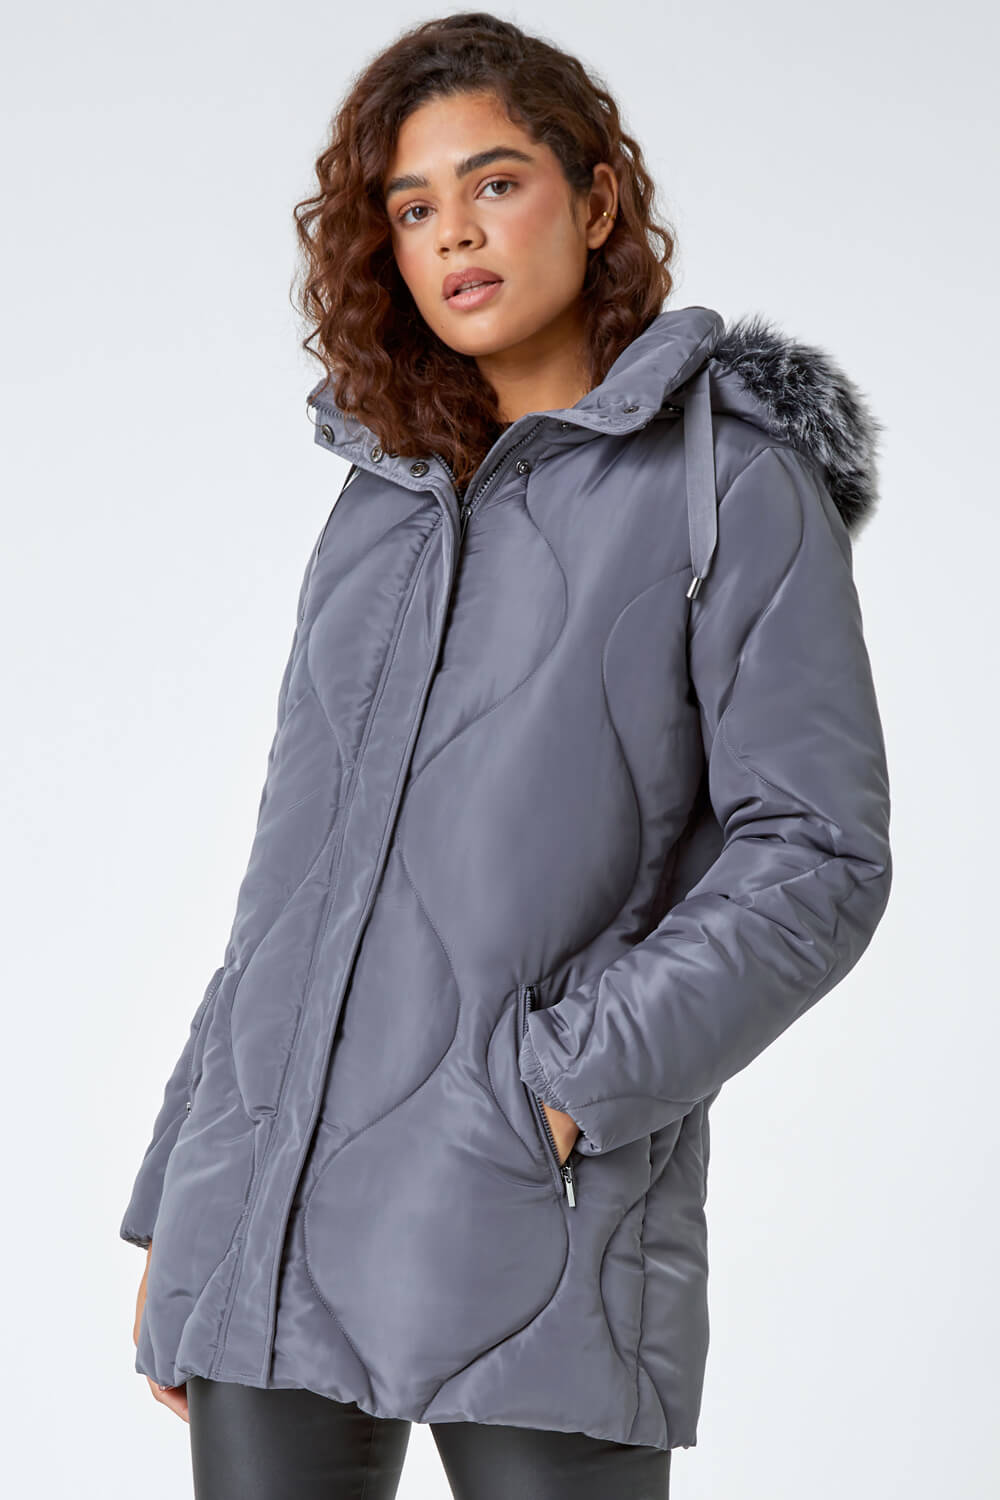 Grey Quilted Faux Fur Hooded Coat, Image 2 of 5